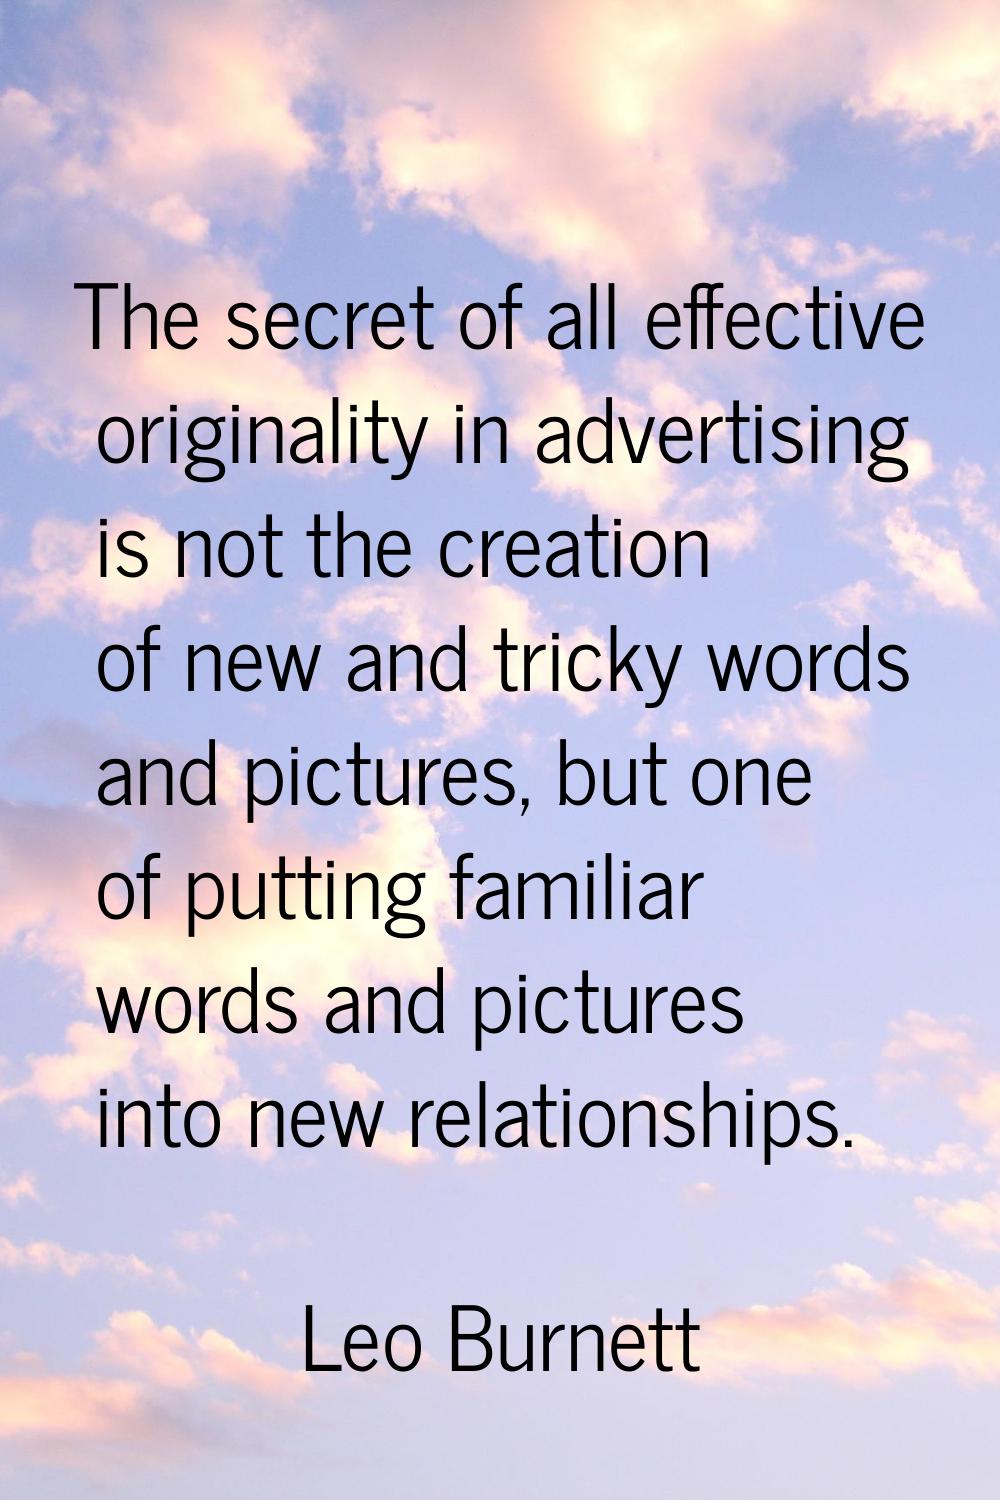 The secret of all effective originality in advertising is not the creation of new and tricky words 